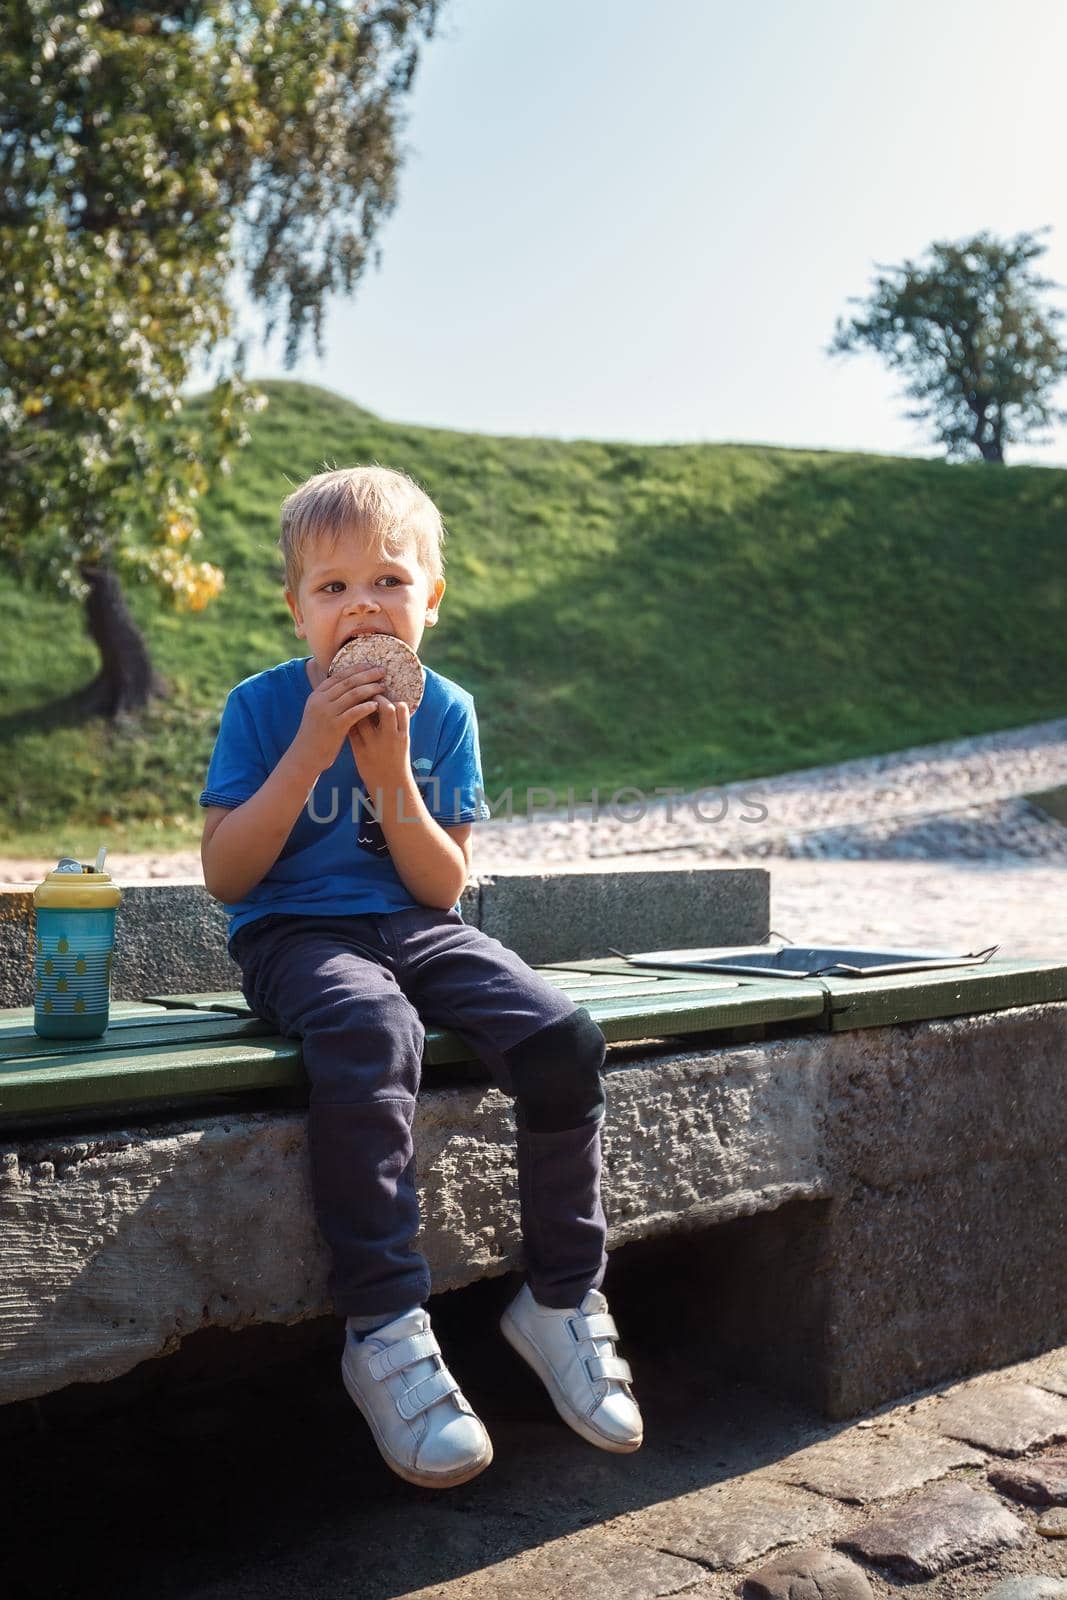 Adorable baby boy eat biscuit or cookie sitting on wooden bench at outdoor park. Happy kid enjoying with food, he licks the chocolate and smears his nose.